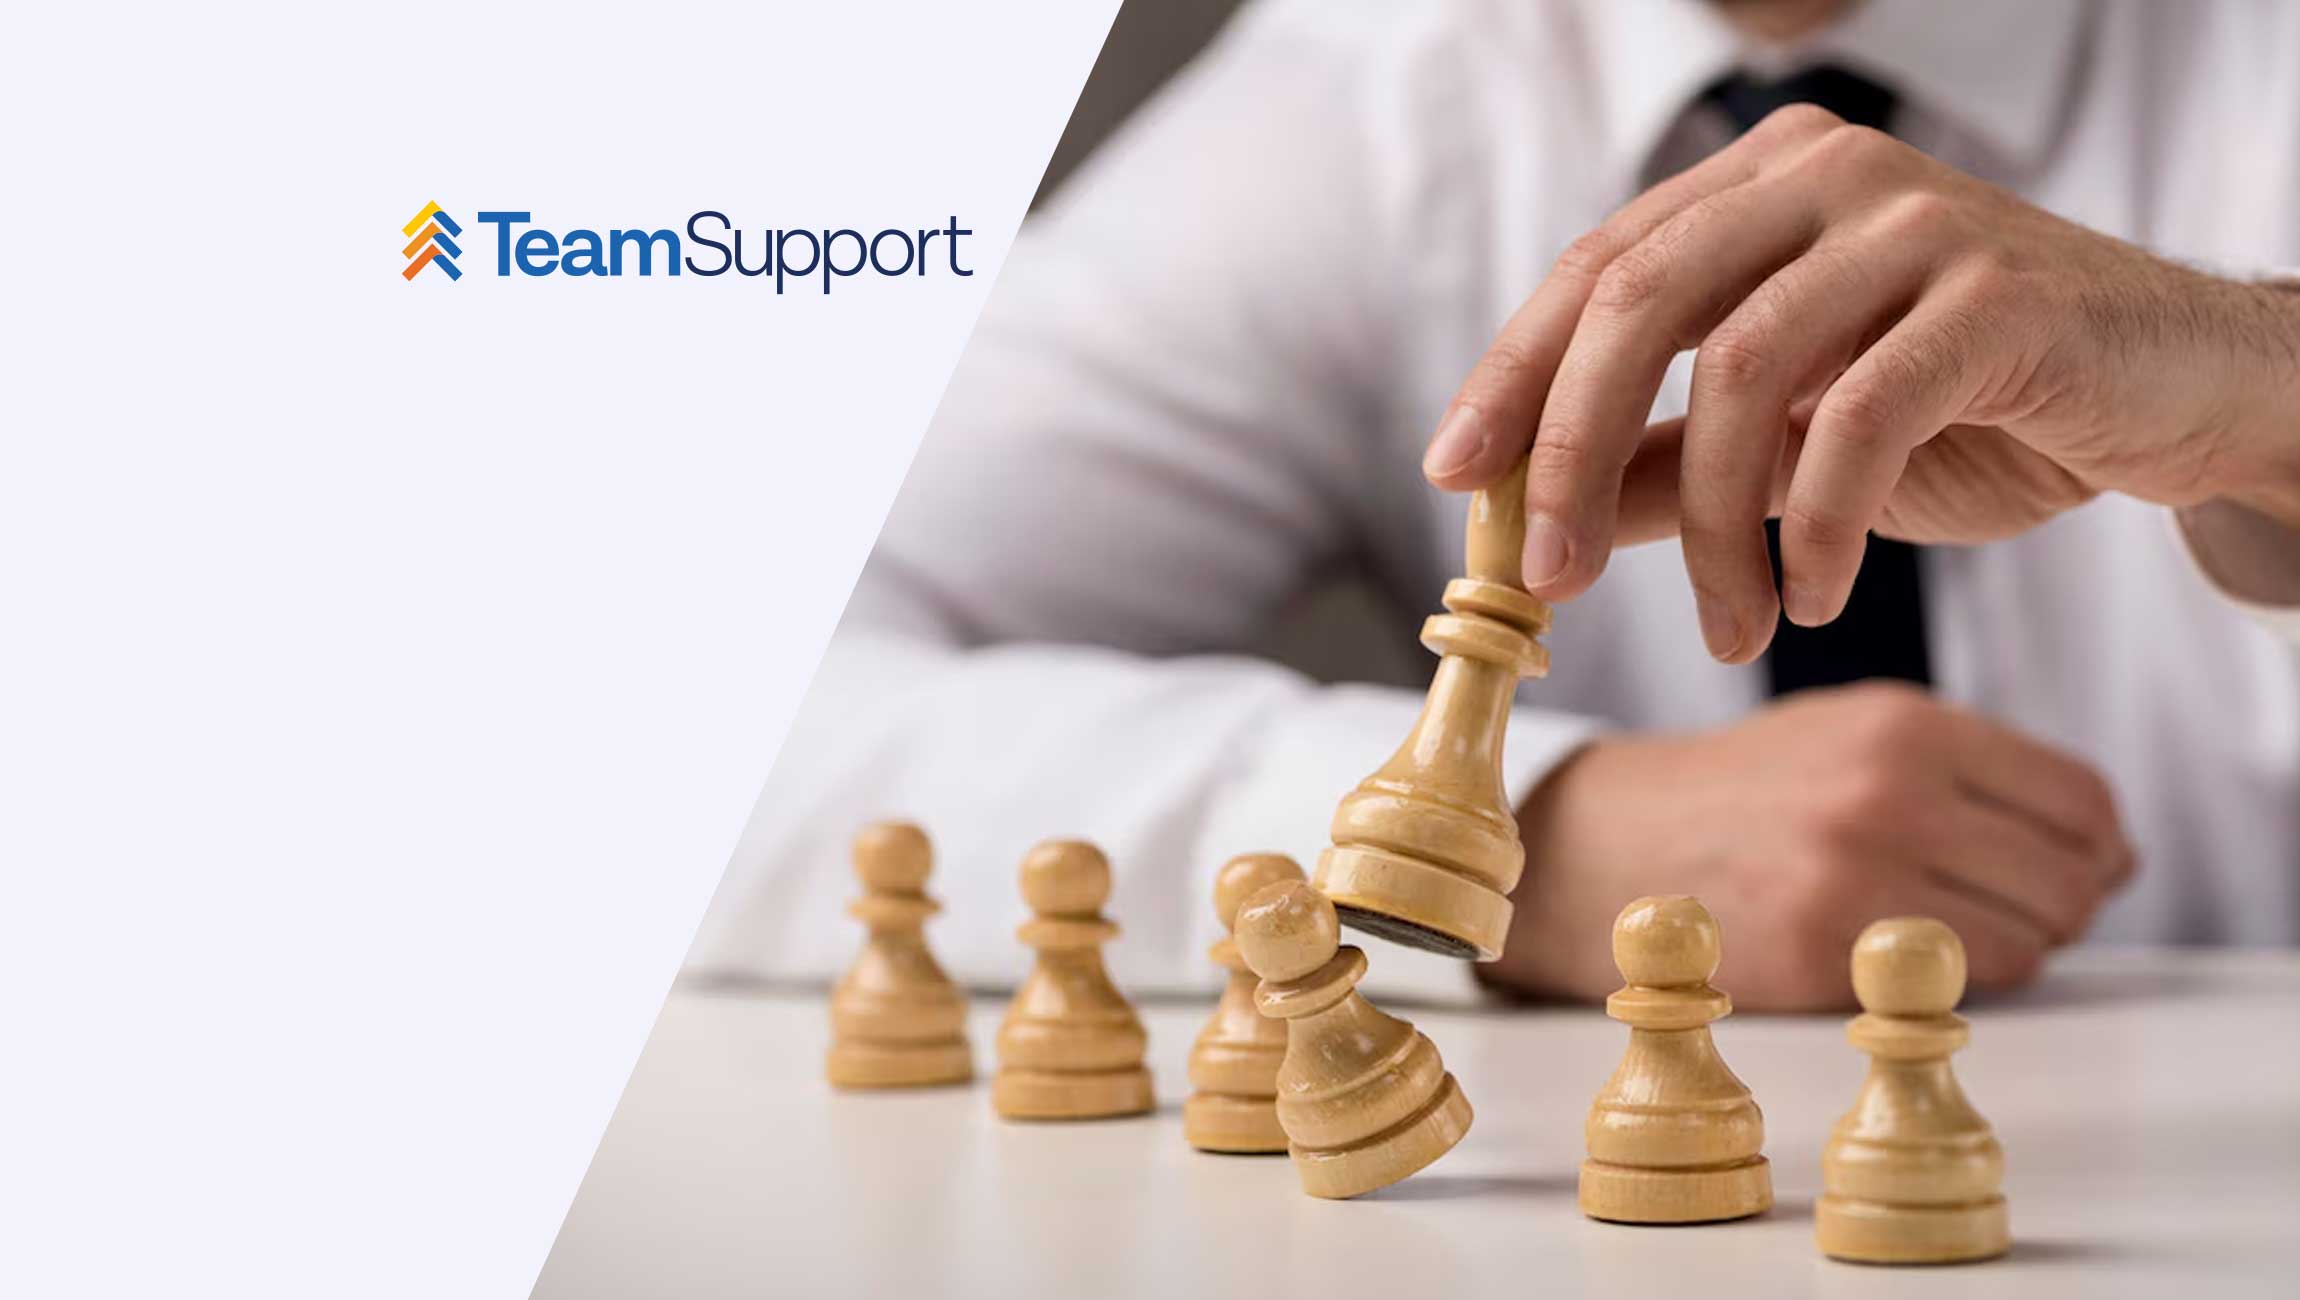 TeamSupport Welcomes a New CEO and Introduces Conversational AI